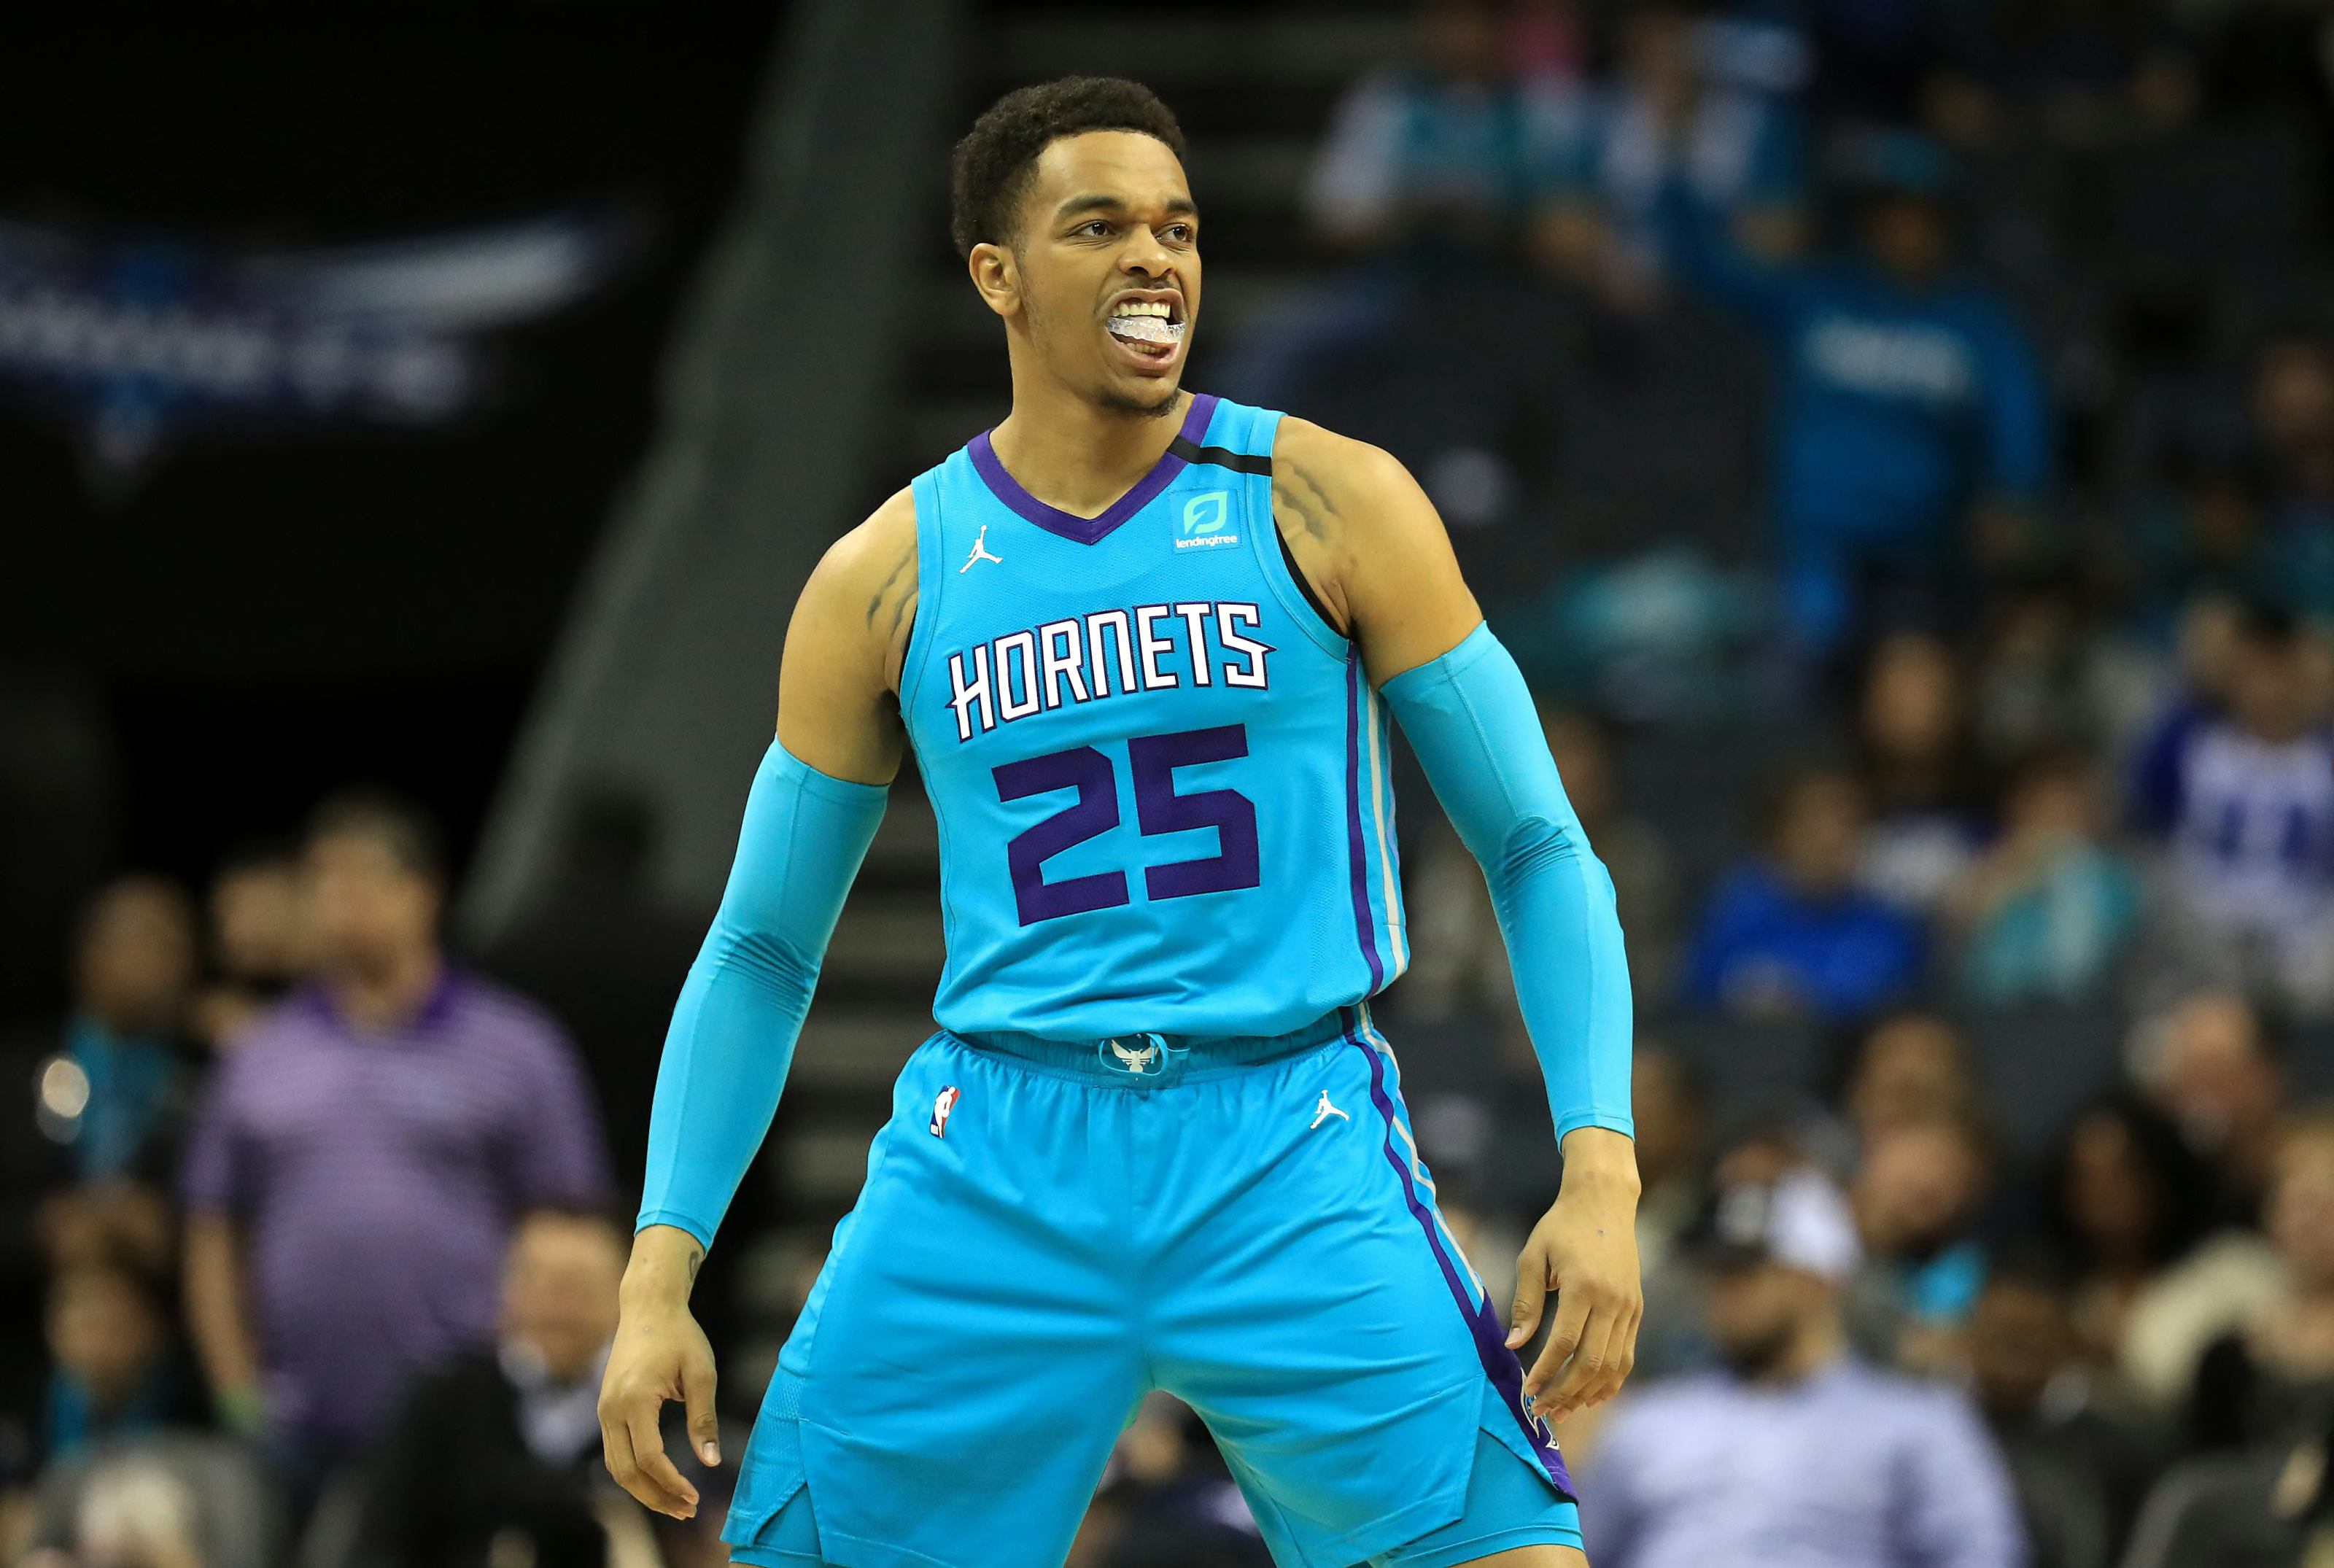 Charlotte Hornets lineups: 5 lineups the team can use in 2021 - Page 2